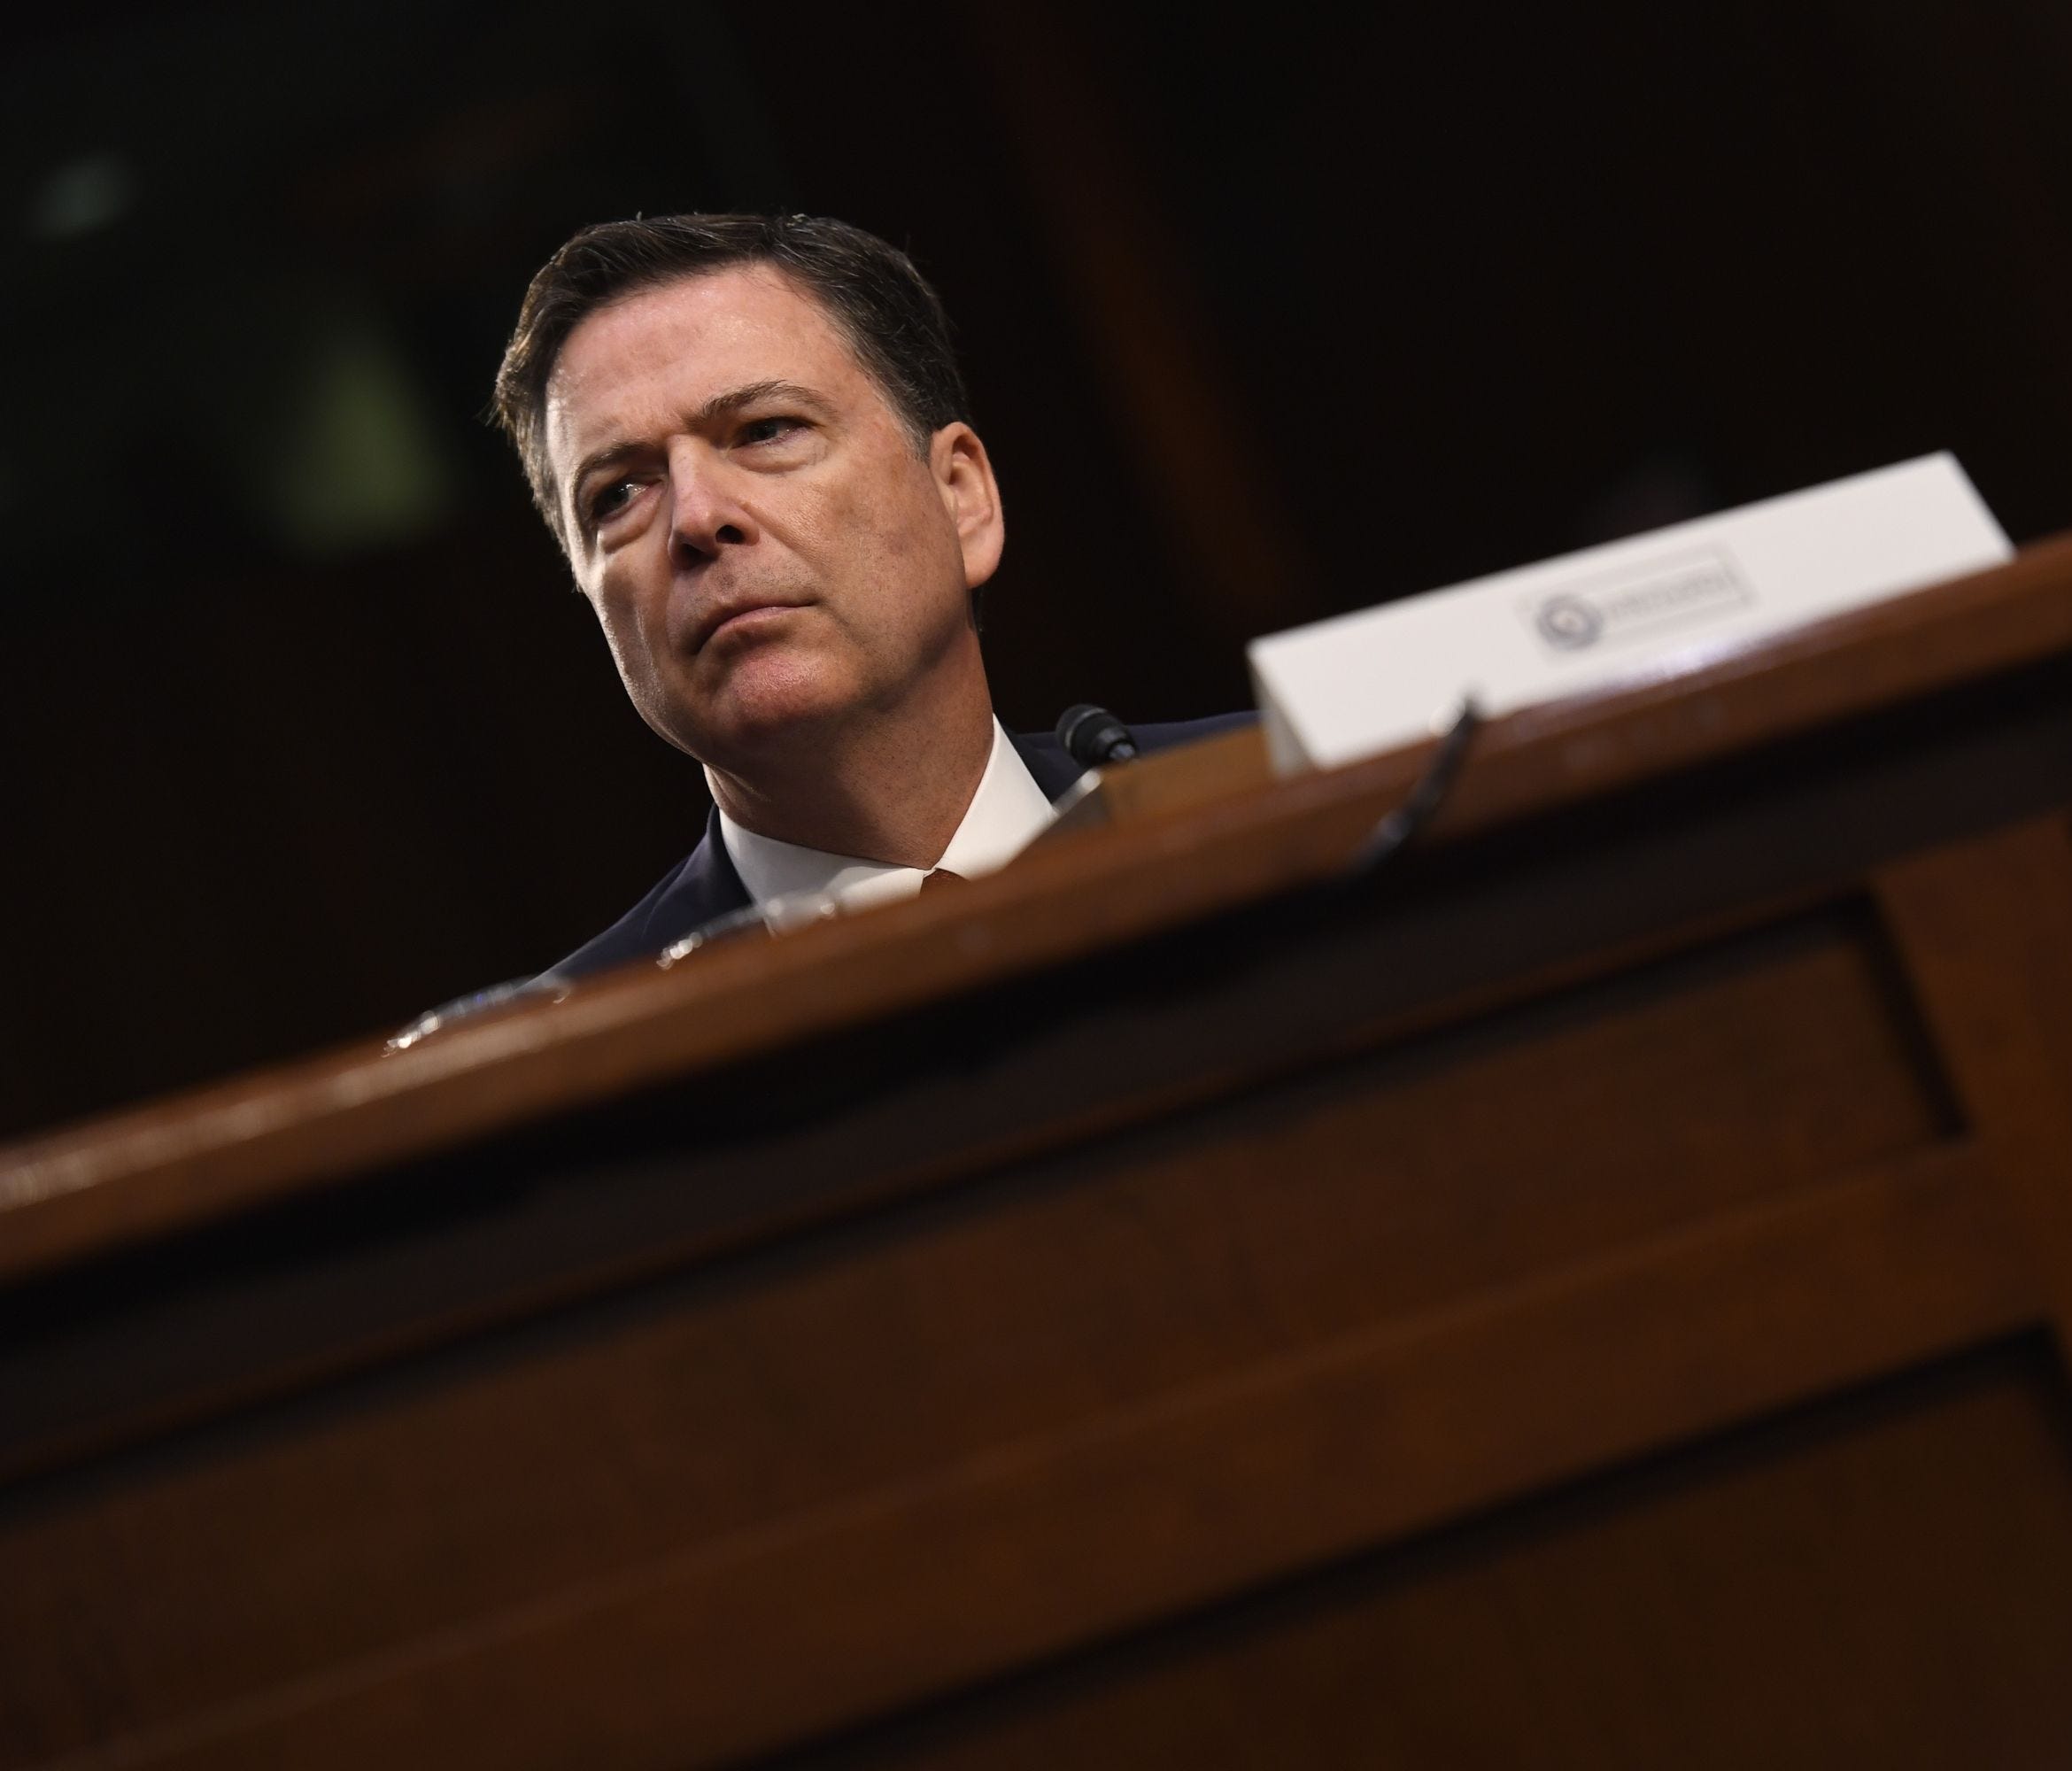 Former FBI director James Comey testifies in front of the Senate Intelligence Committee on June 8, 2017.